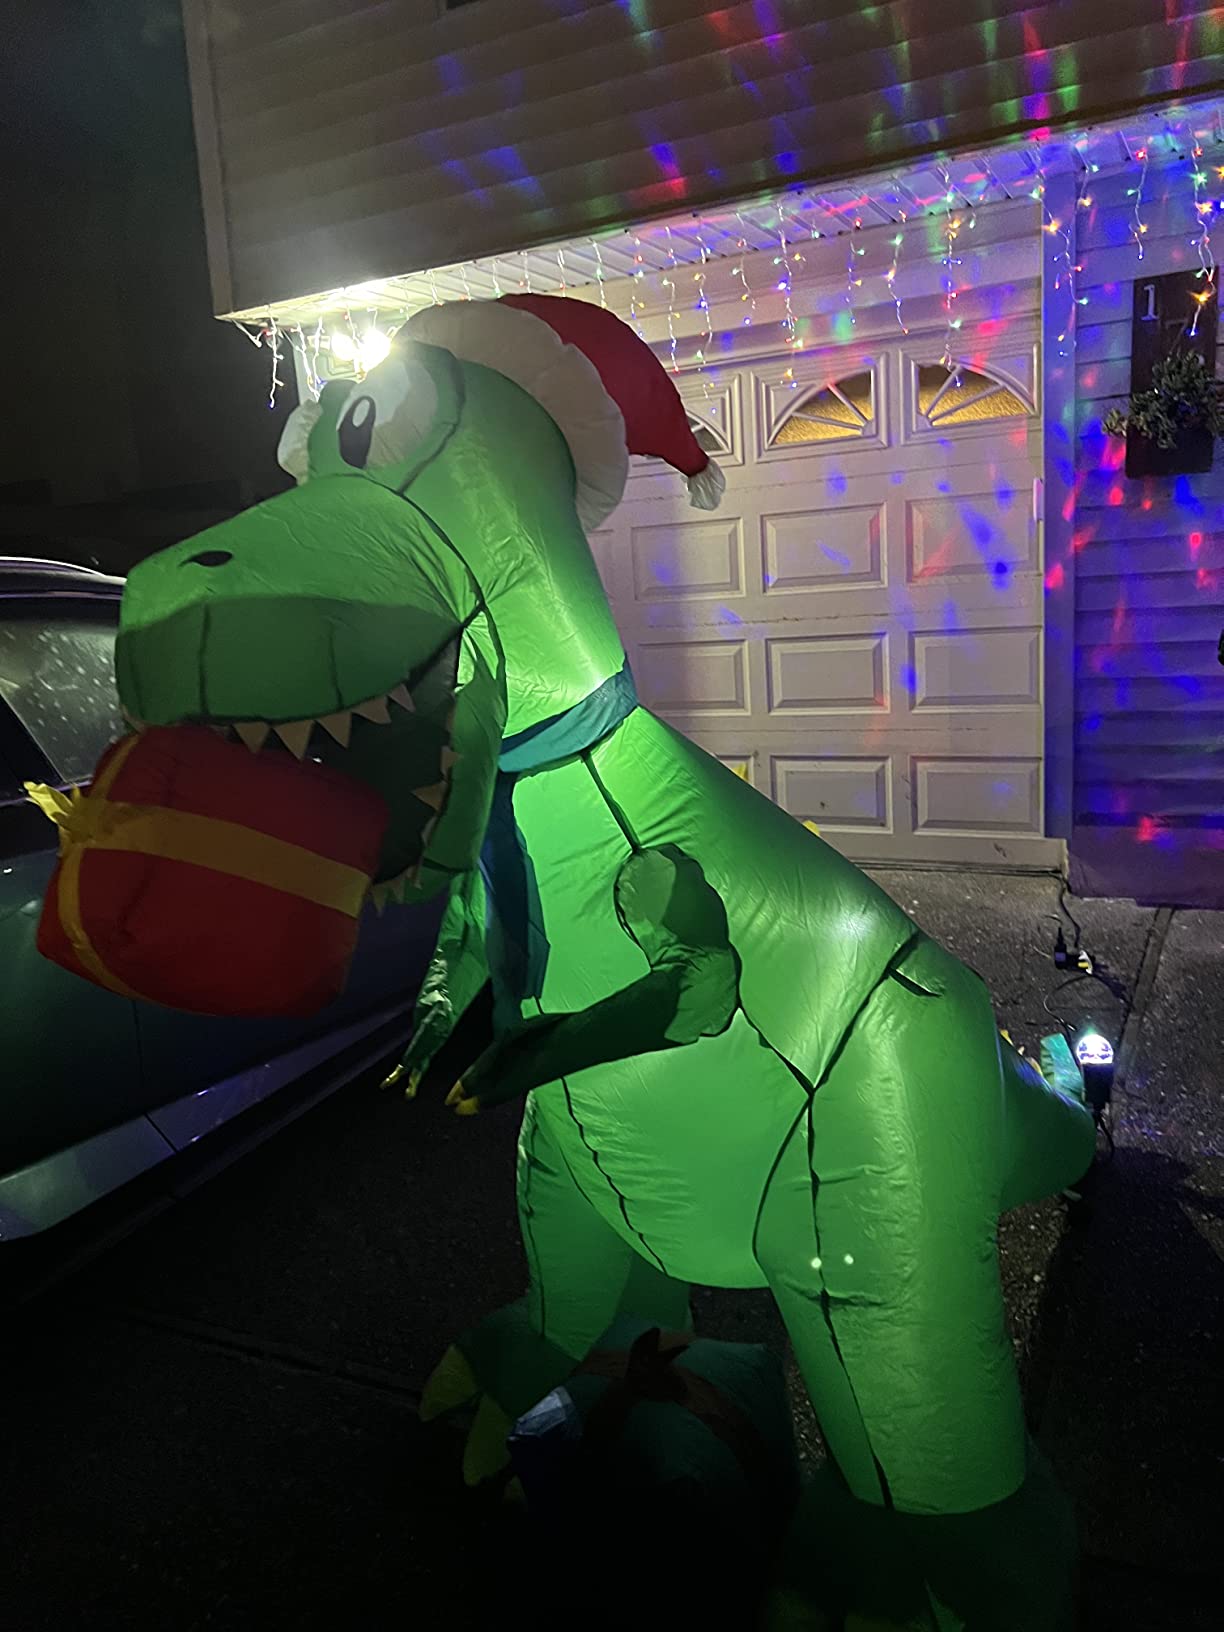 Highly recommend these lights to anyone who loves Christmas decorations and dinosaurs.